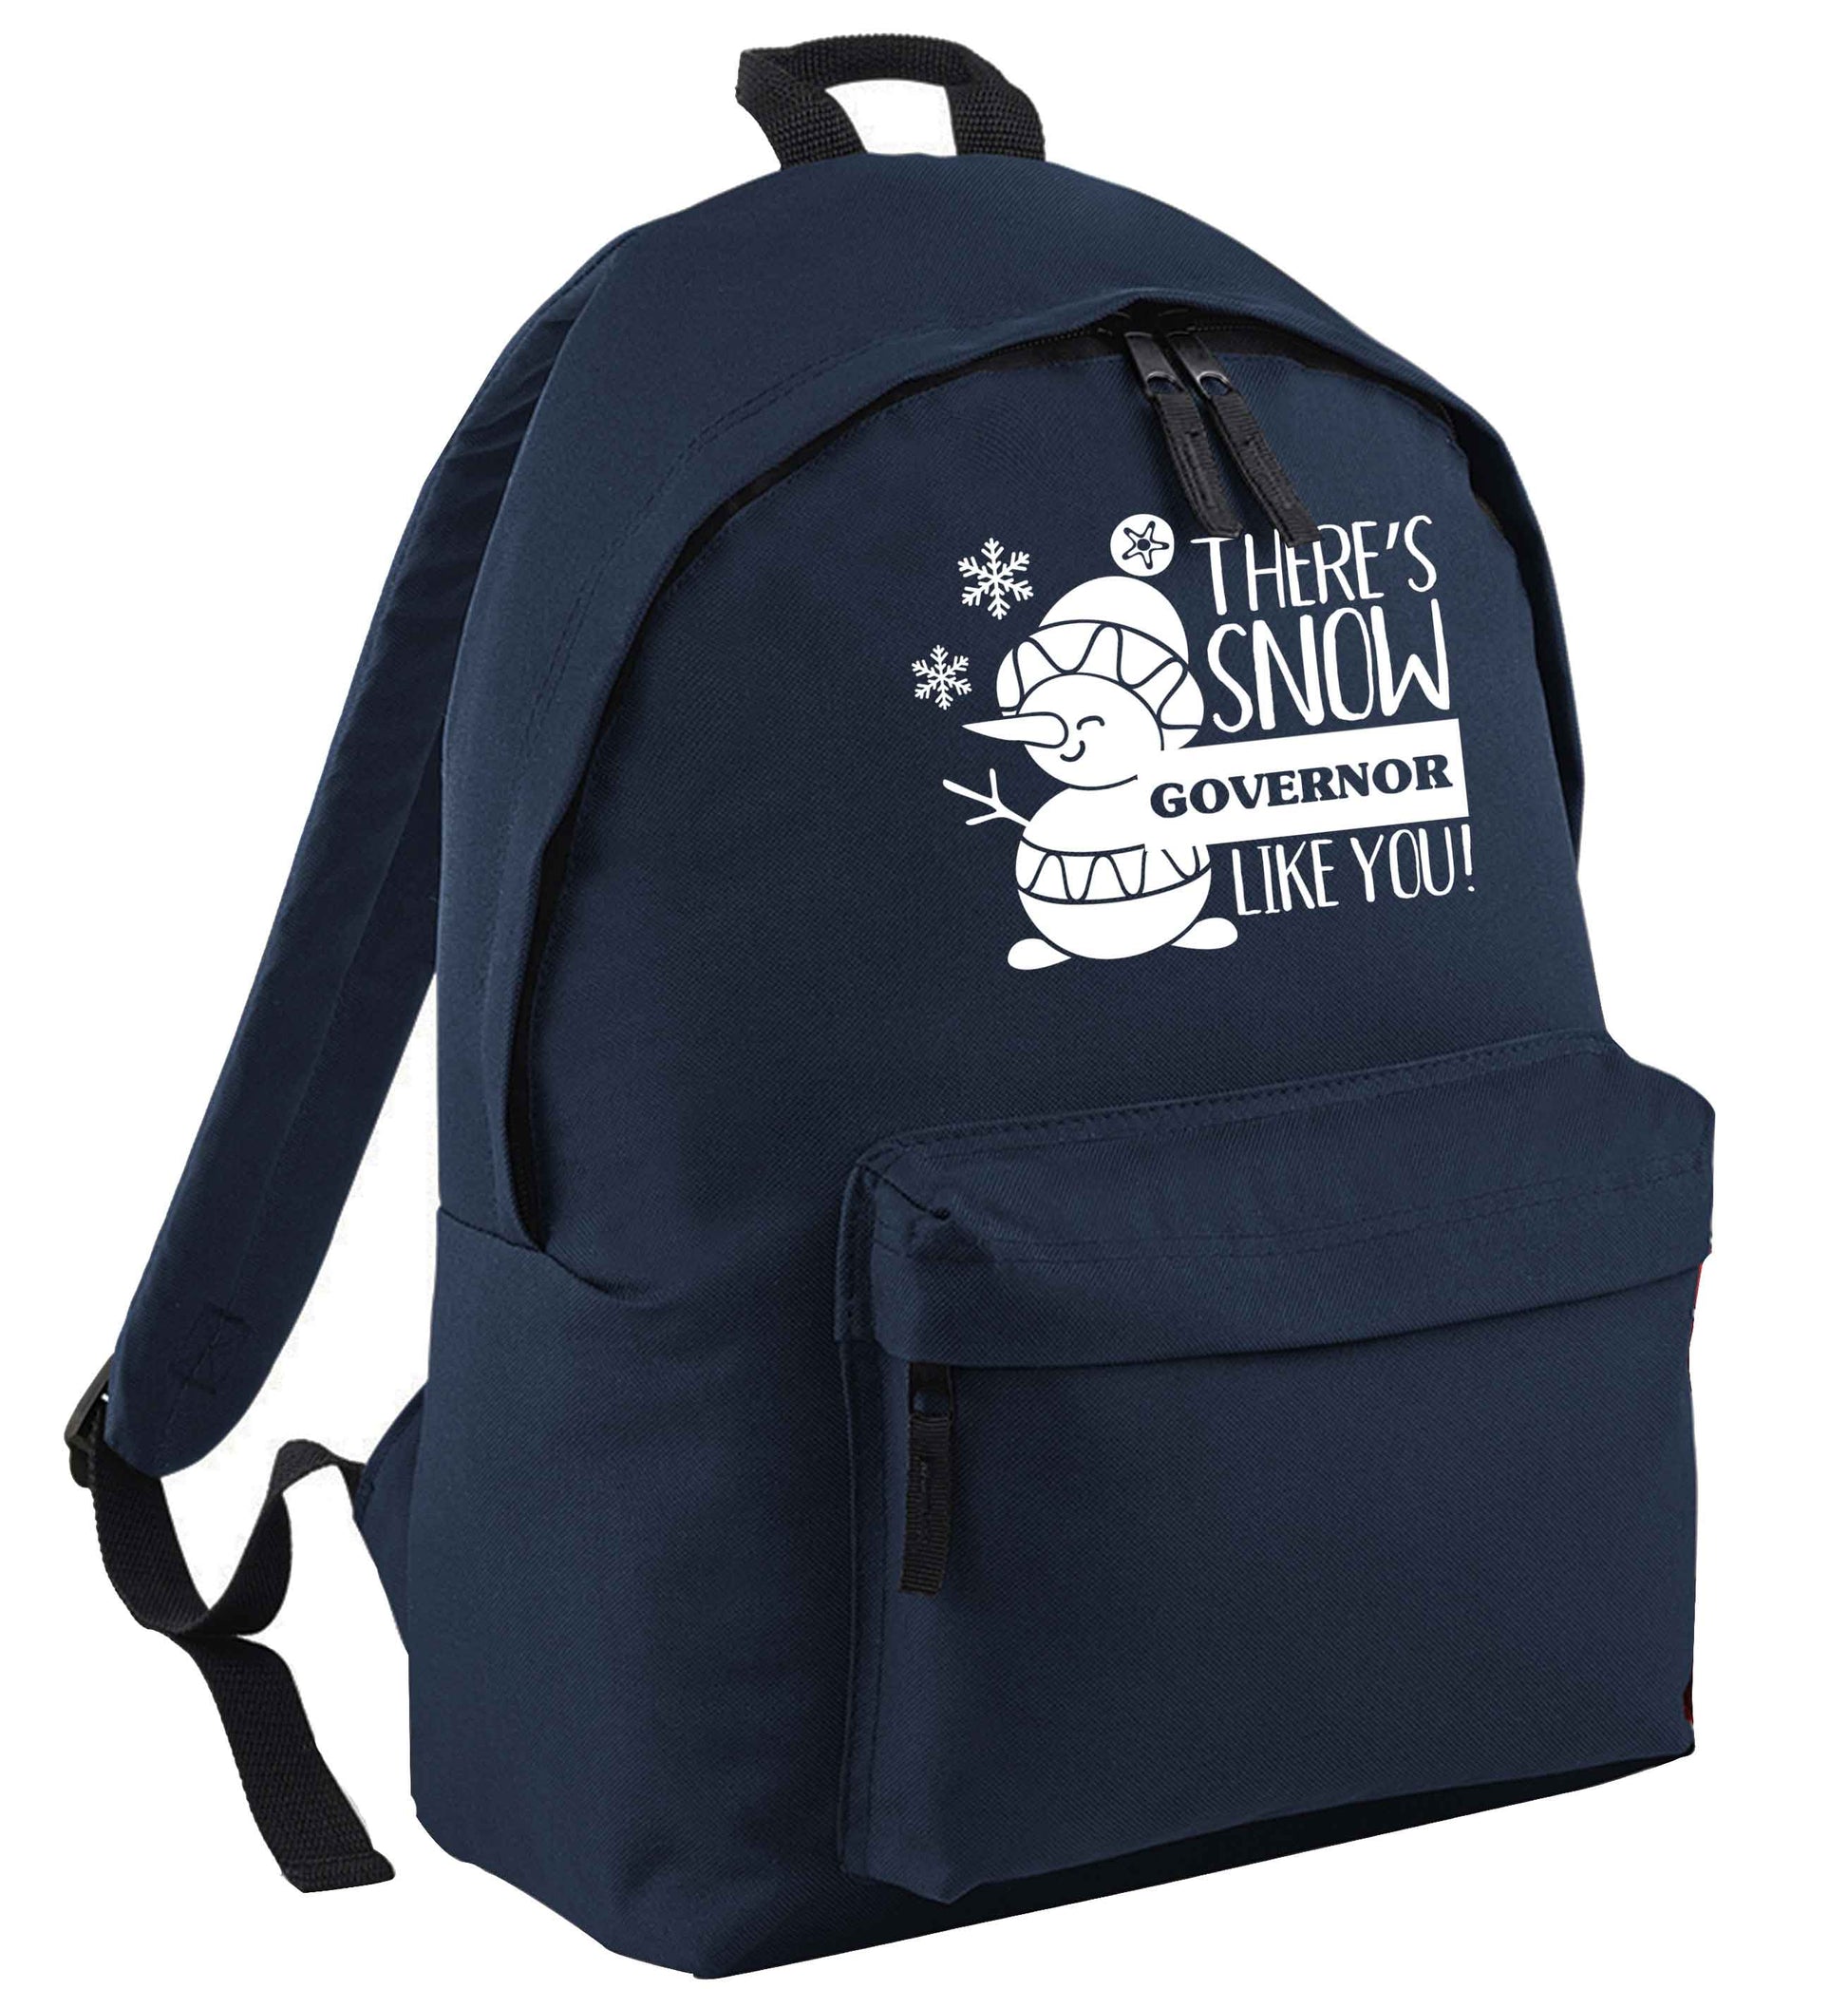 There's snow governor like you | Children's backpack